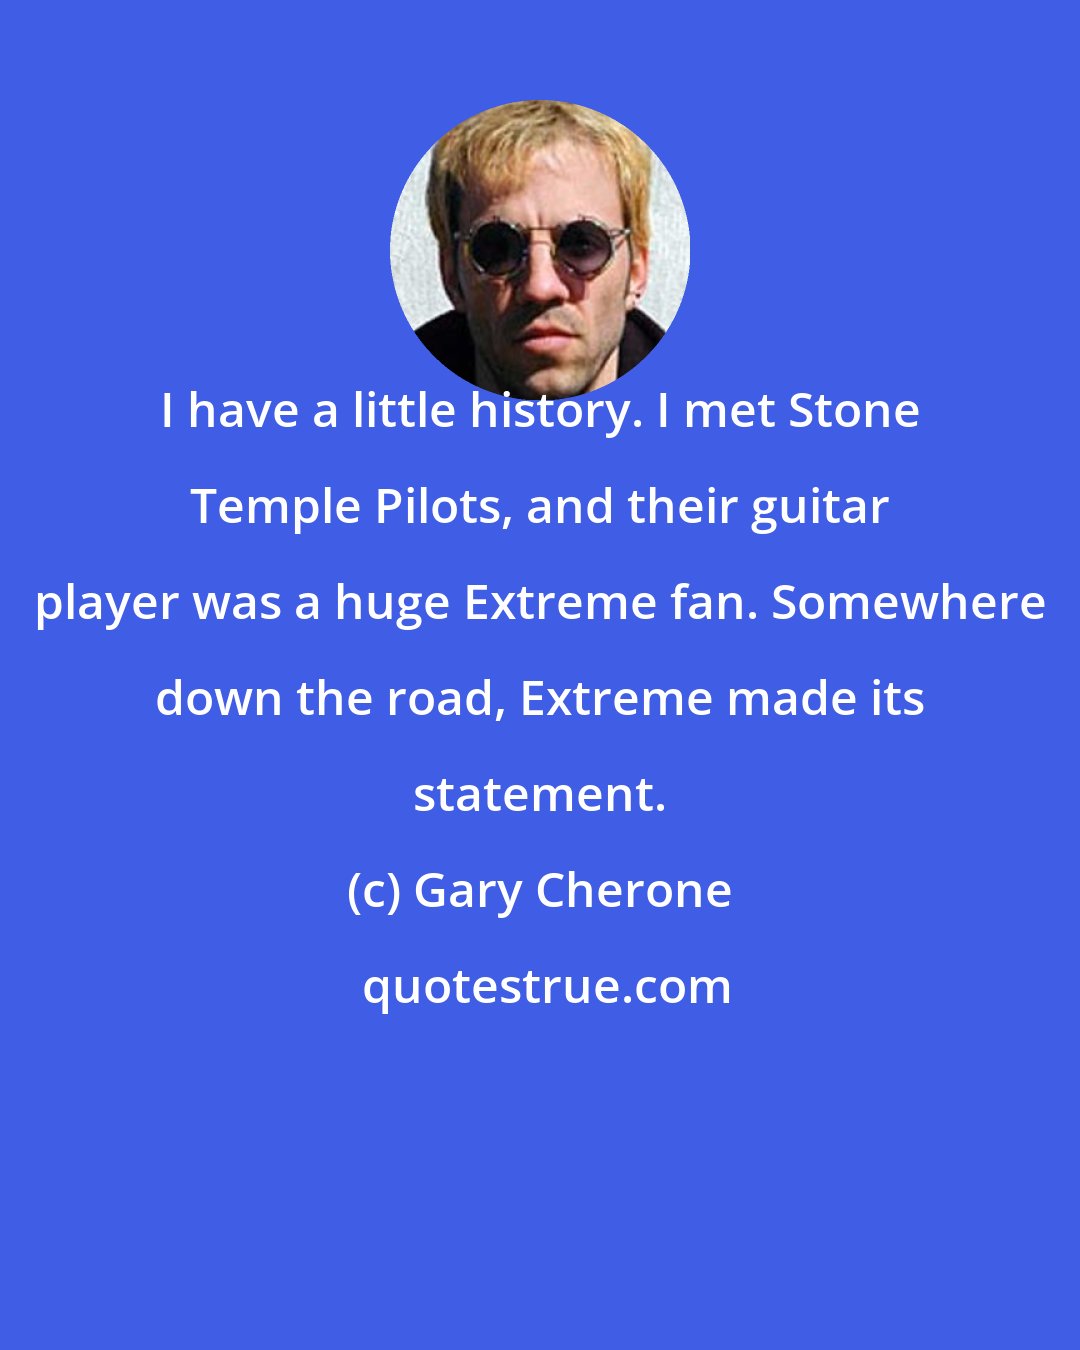 Gary Cherone: I have a little history. I met Stone Temple Pilots, and their guitar player was a huge Extreme fan. Somewhere down the road, Extreme made its statement.